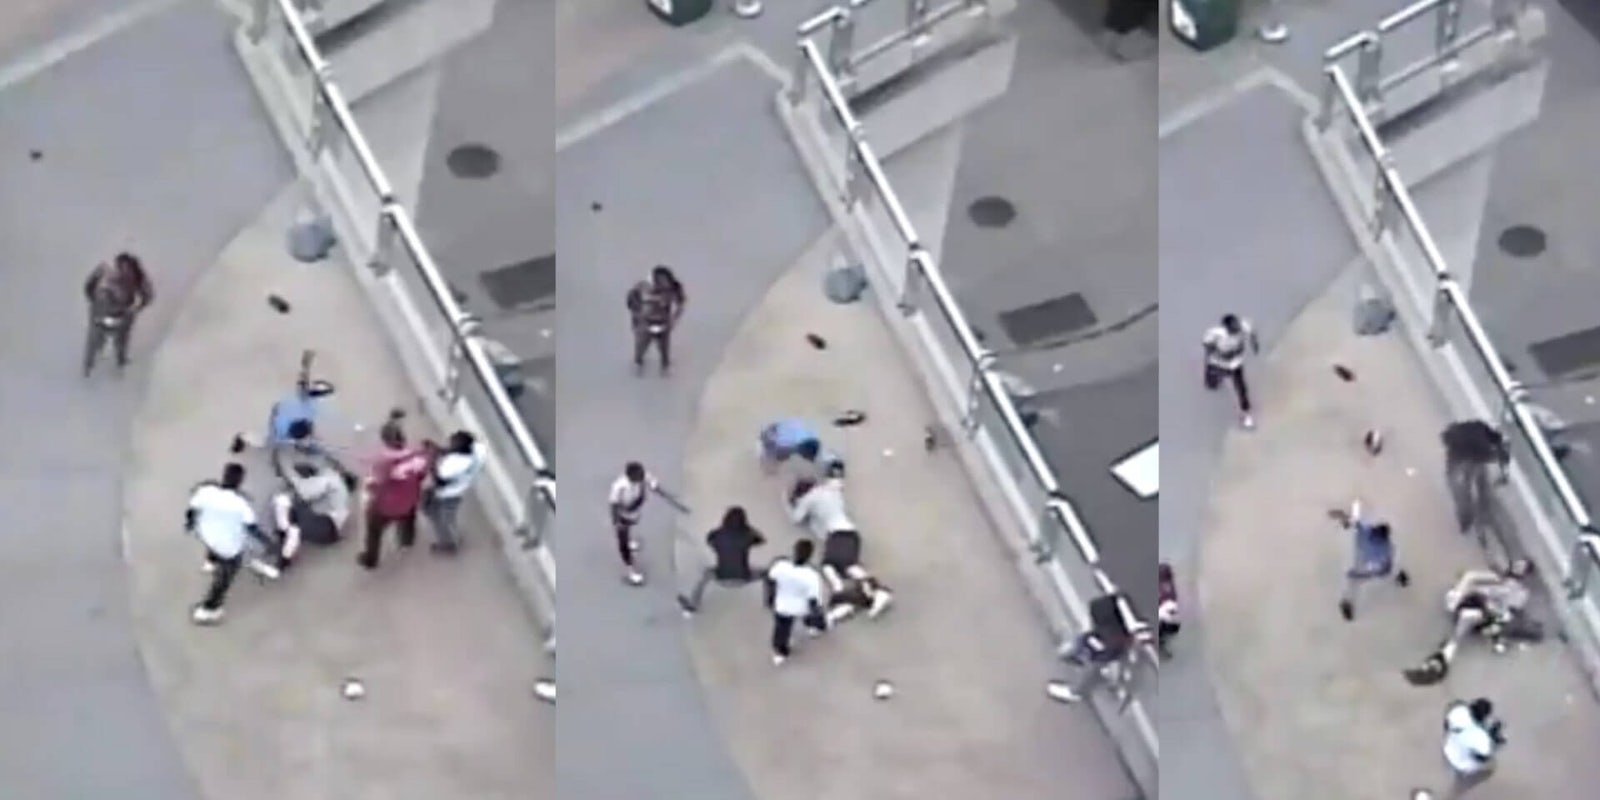 Screengrabs show the mob beating, kicking and running a bicycle over a victim